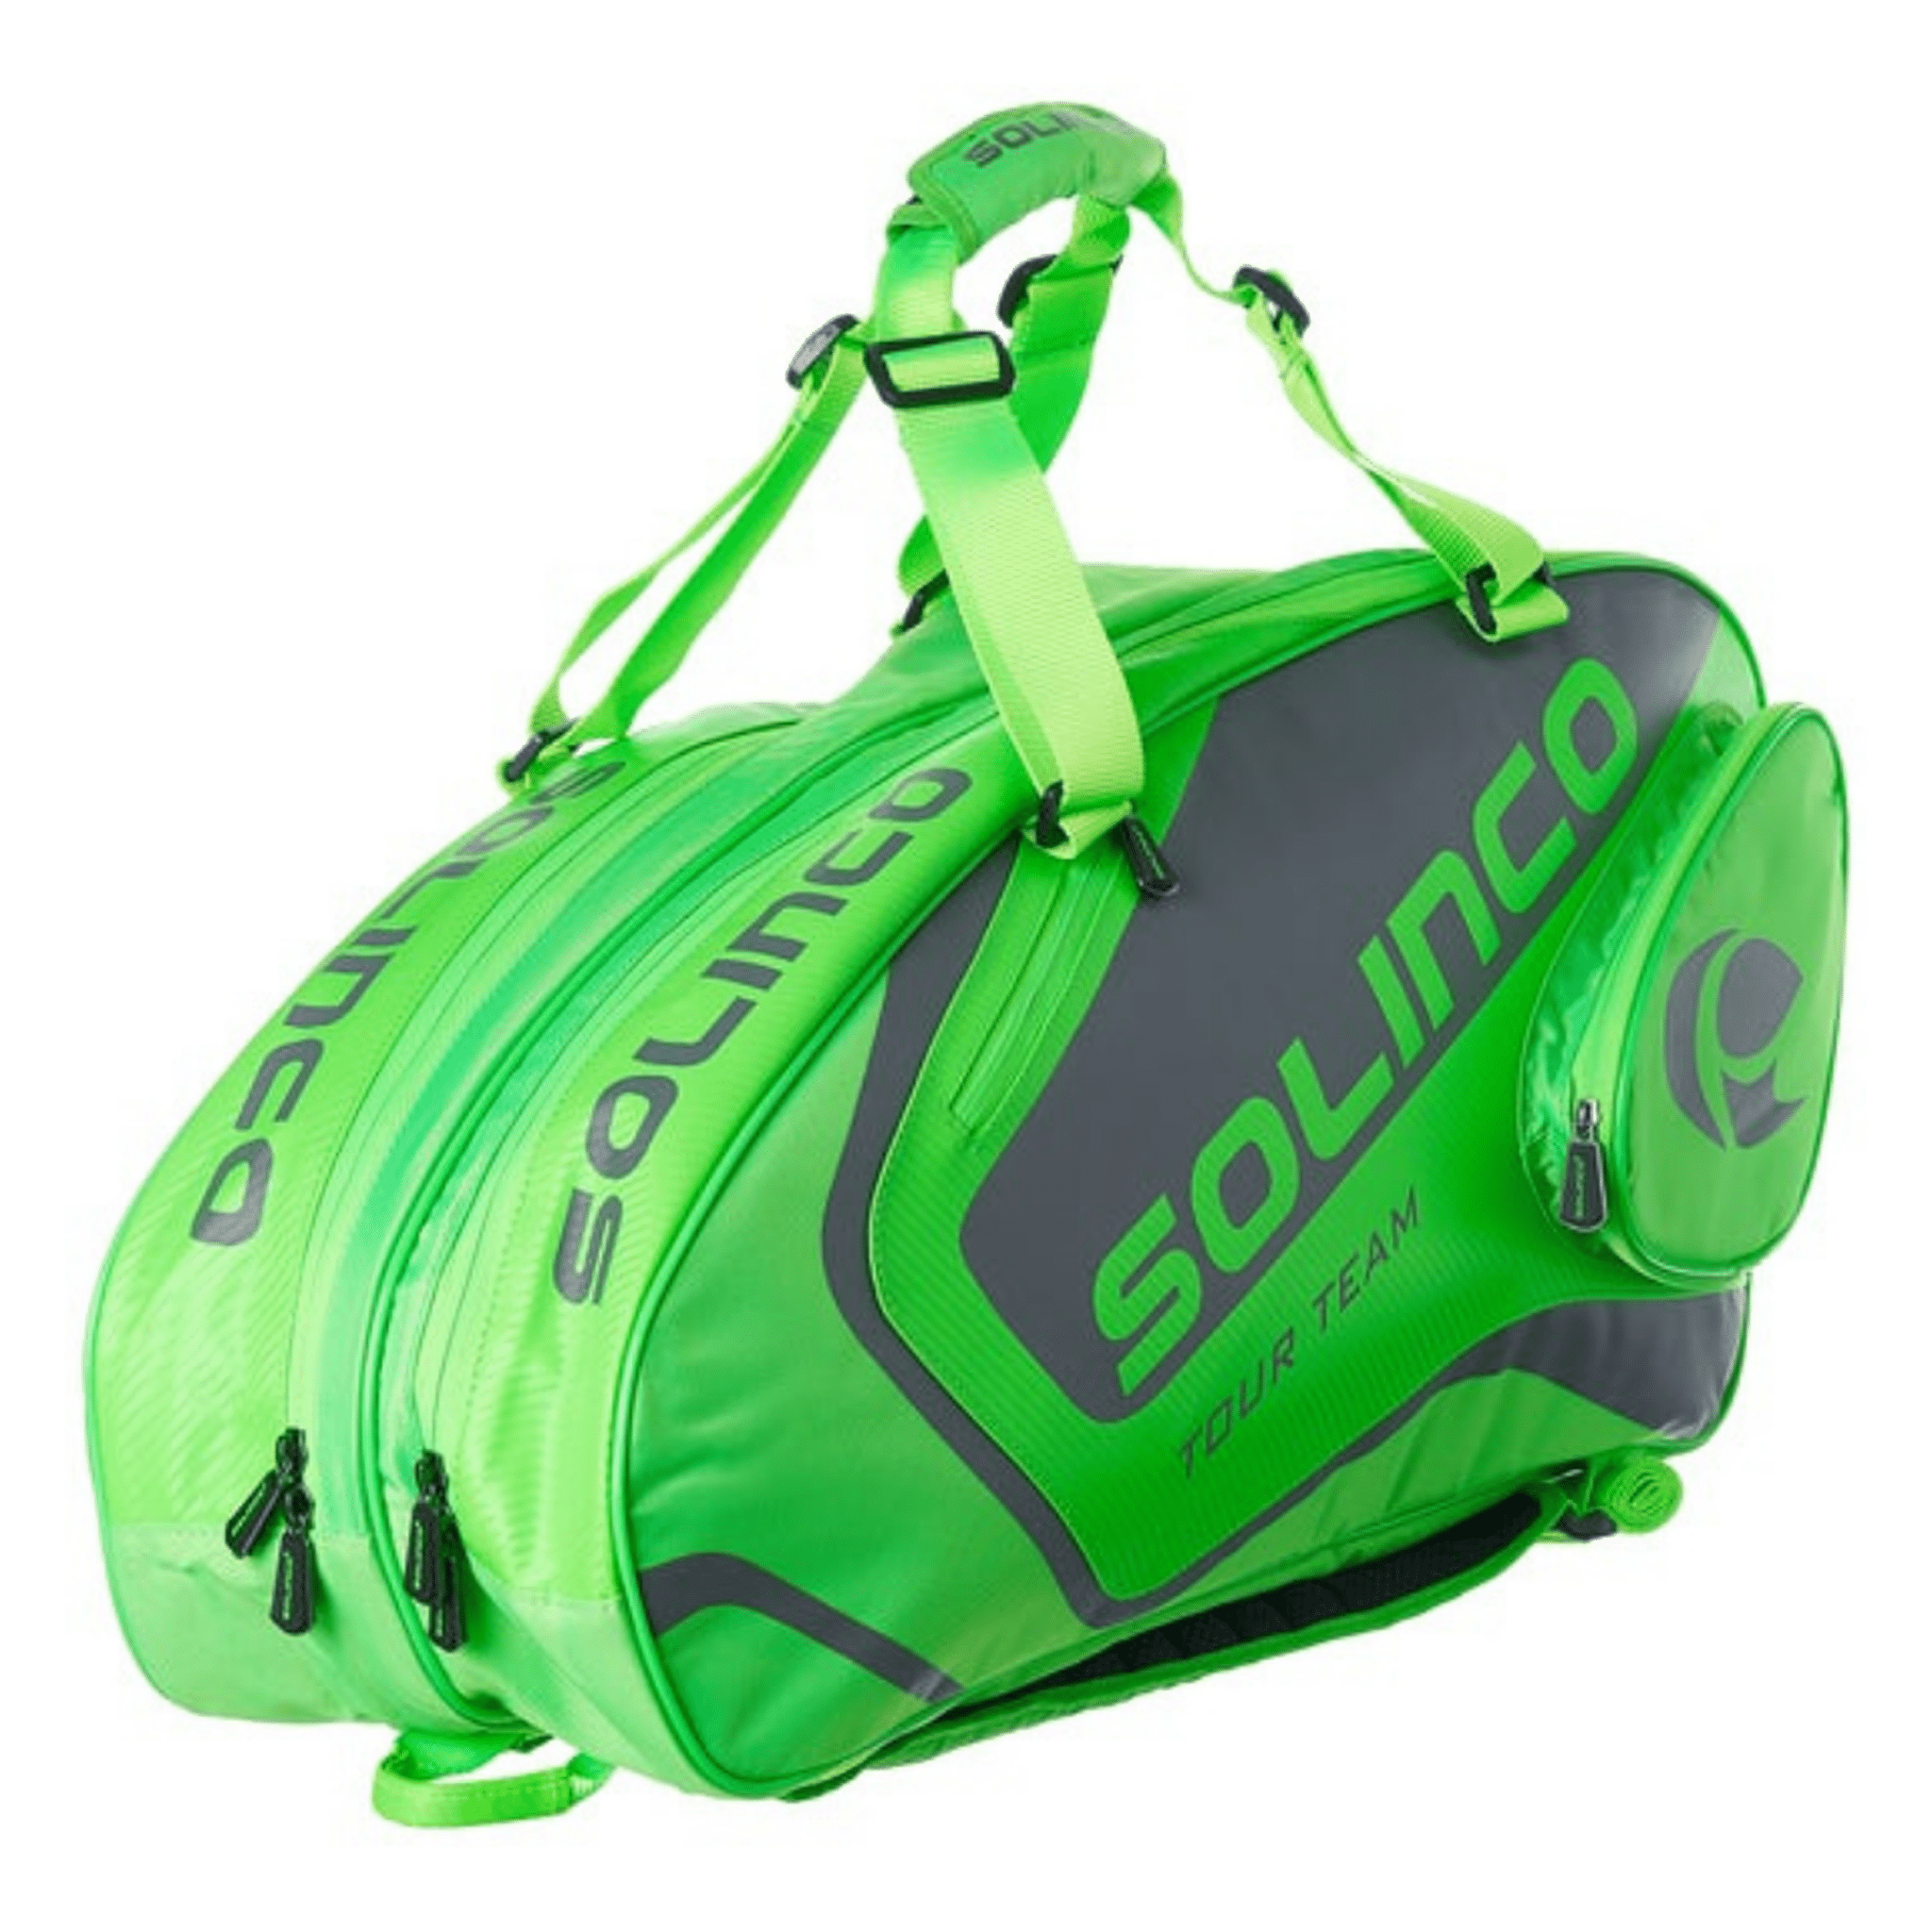 Solinco 6-Pack Tour Bag - Neon Green